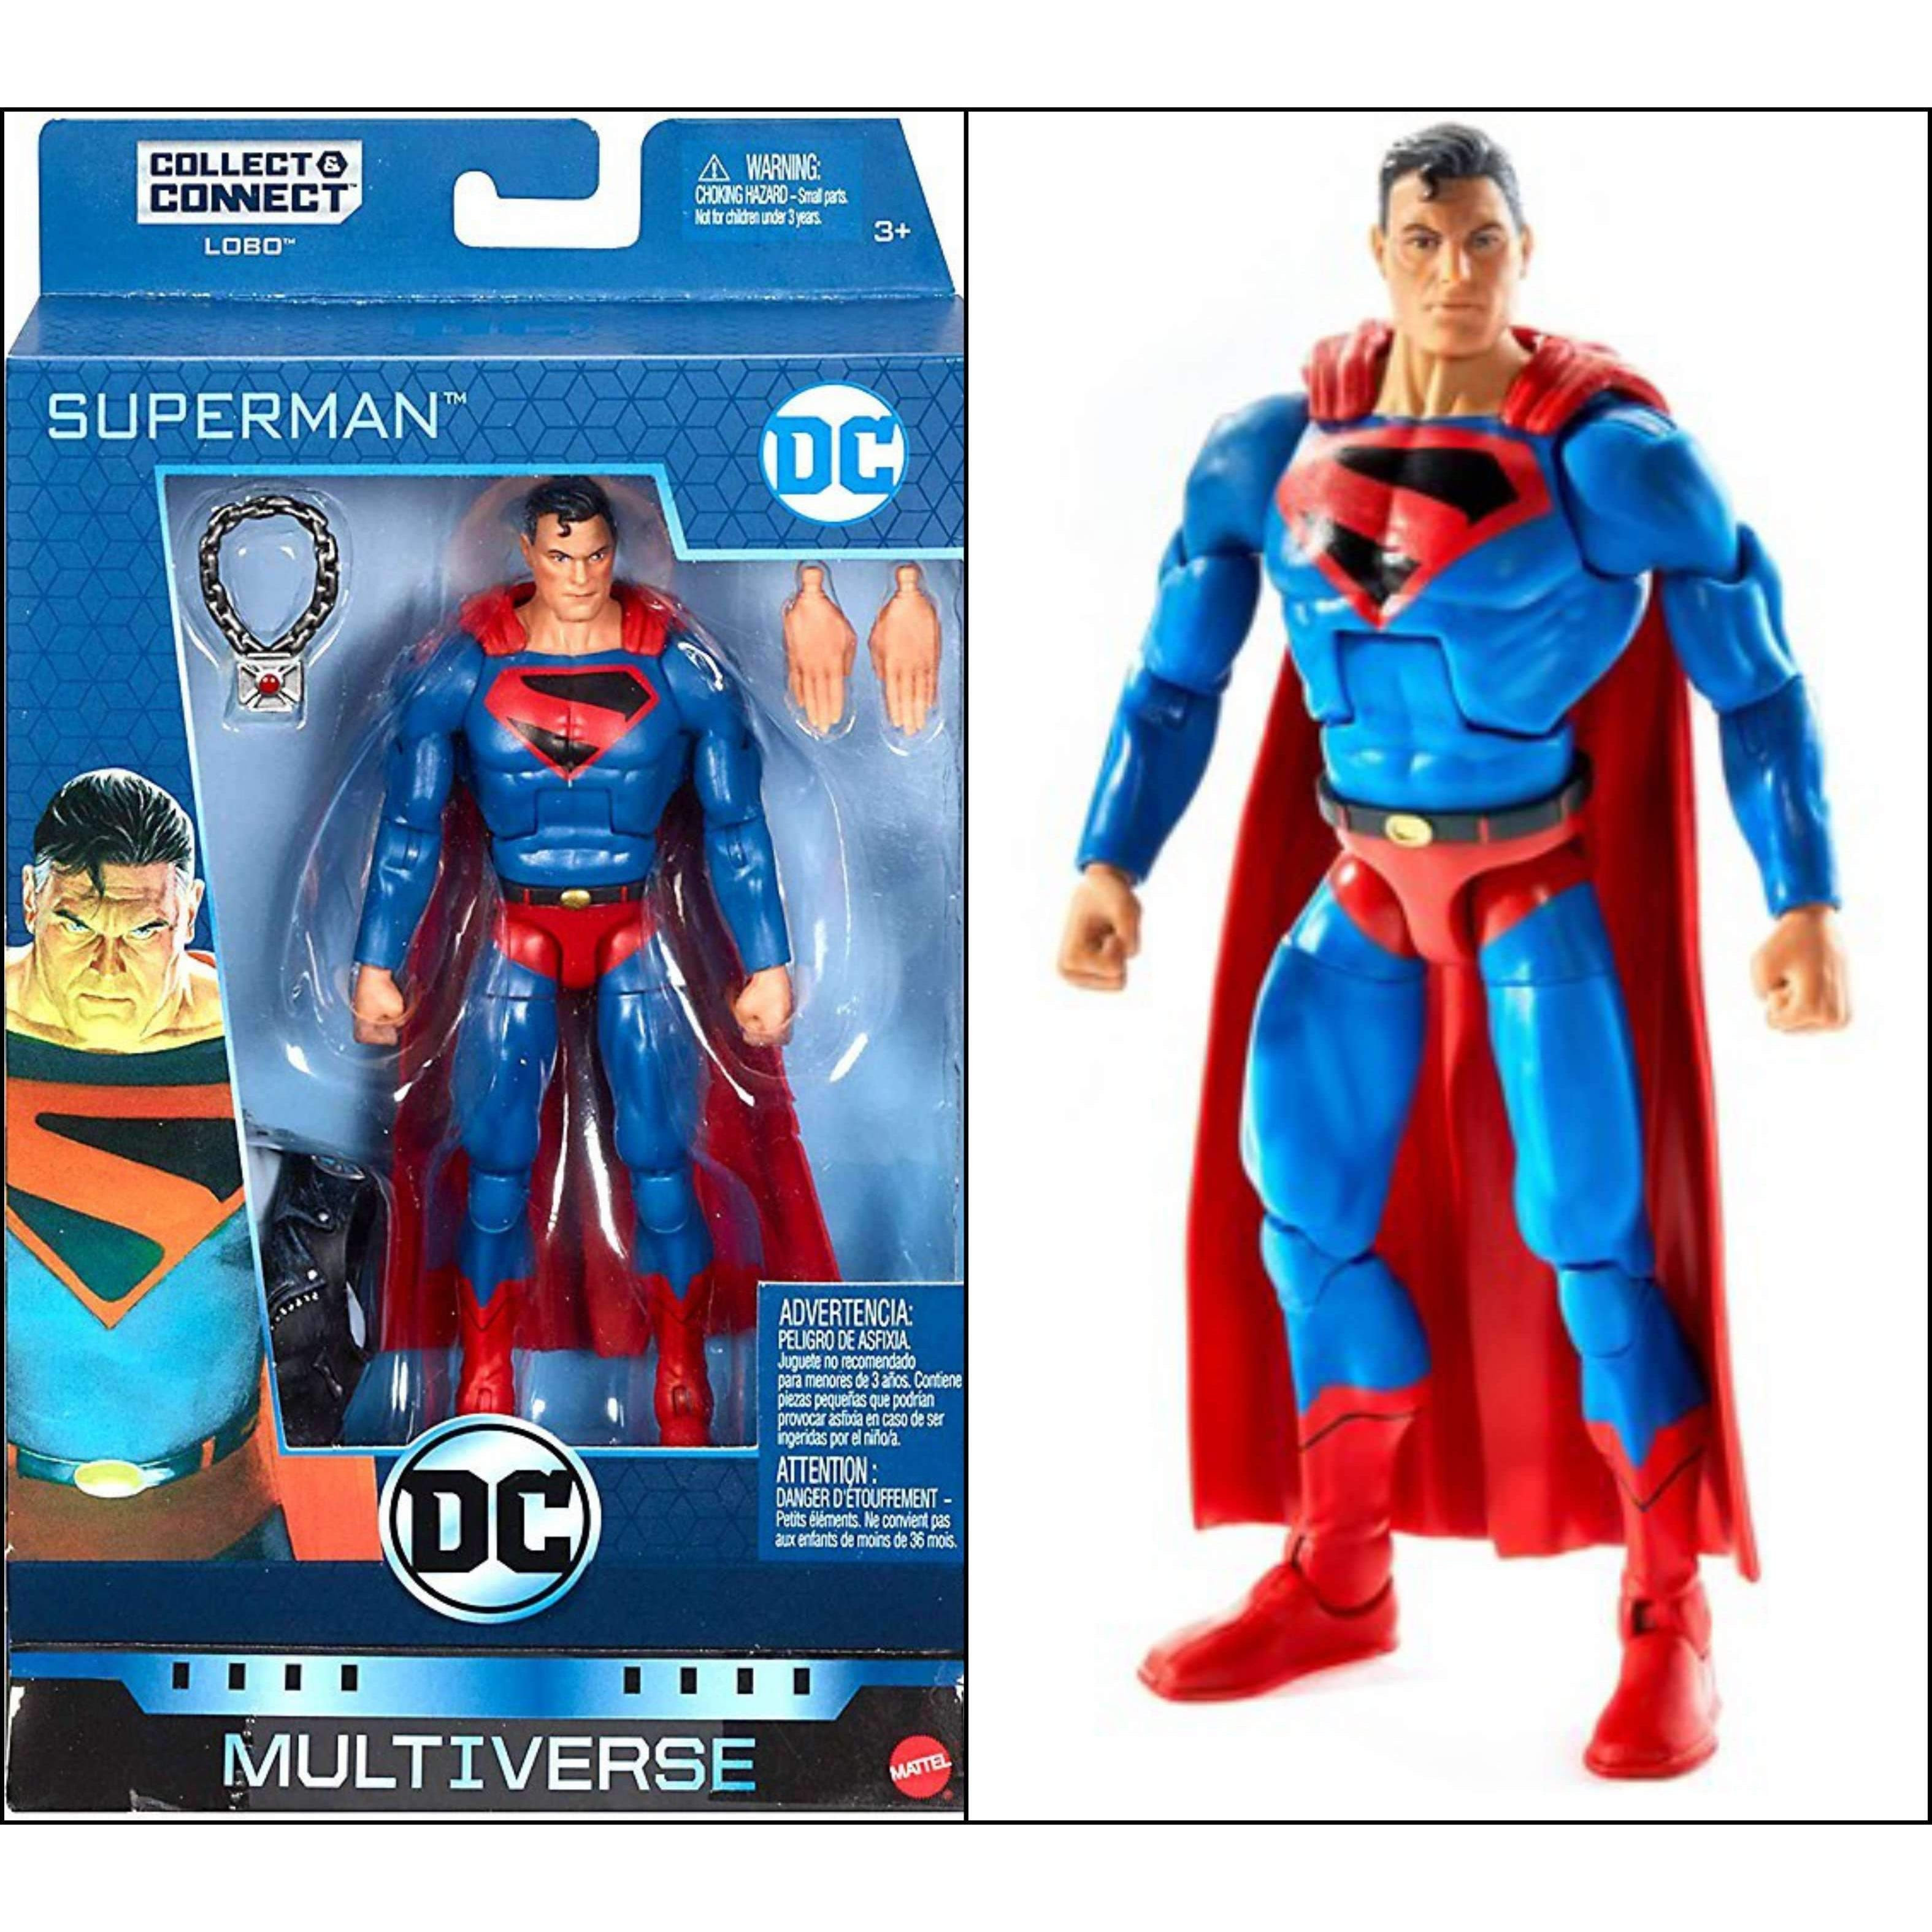 Image of DC Comics Multiverse Wave 10 (Collect & Connect Lobo) - Superman (Kingdom Come) - BACKORDERED APRIL 2019